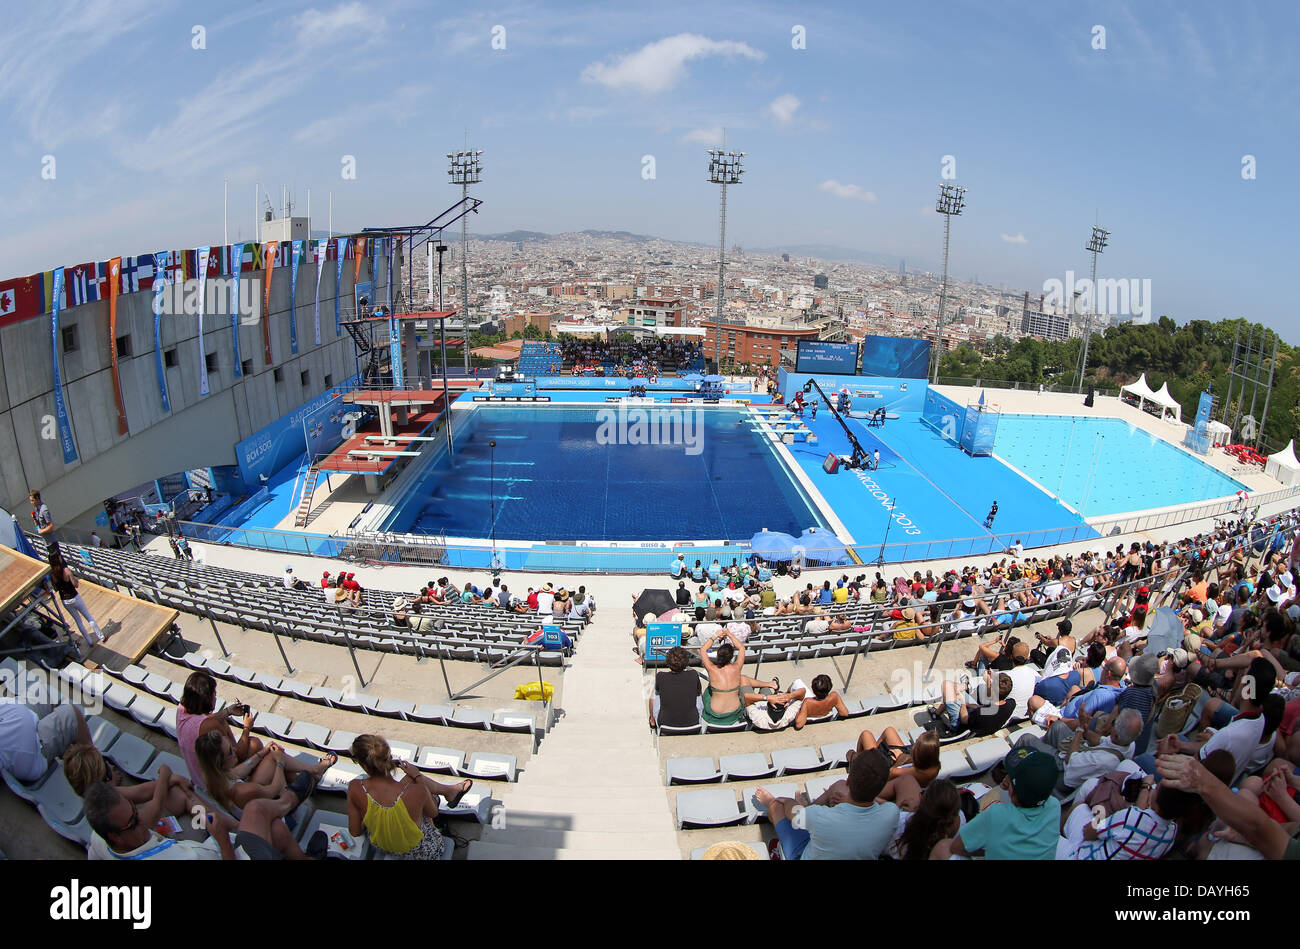 Barcelona, Spain. 21st July, 2013. Diving events take place at Monjtuic Municipal Swimming Pool during the 15th FINA Swimming World Championships in Barcelona, Spain, 21 July 2013. Photo: Friso Gentsch/dpa /dpa/Alamy Live News Stock Photo